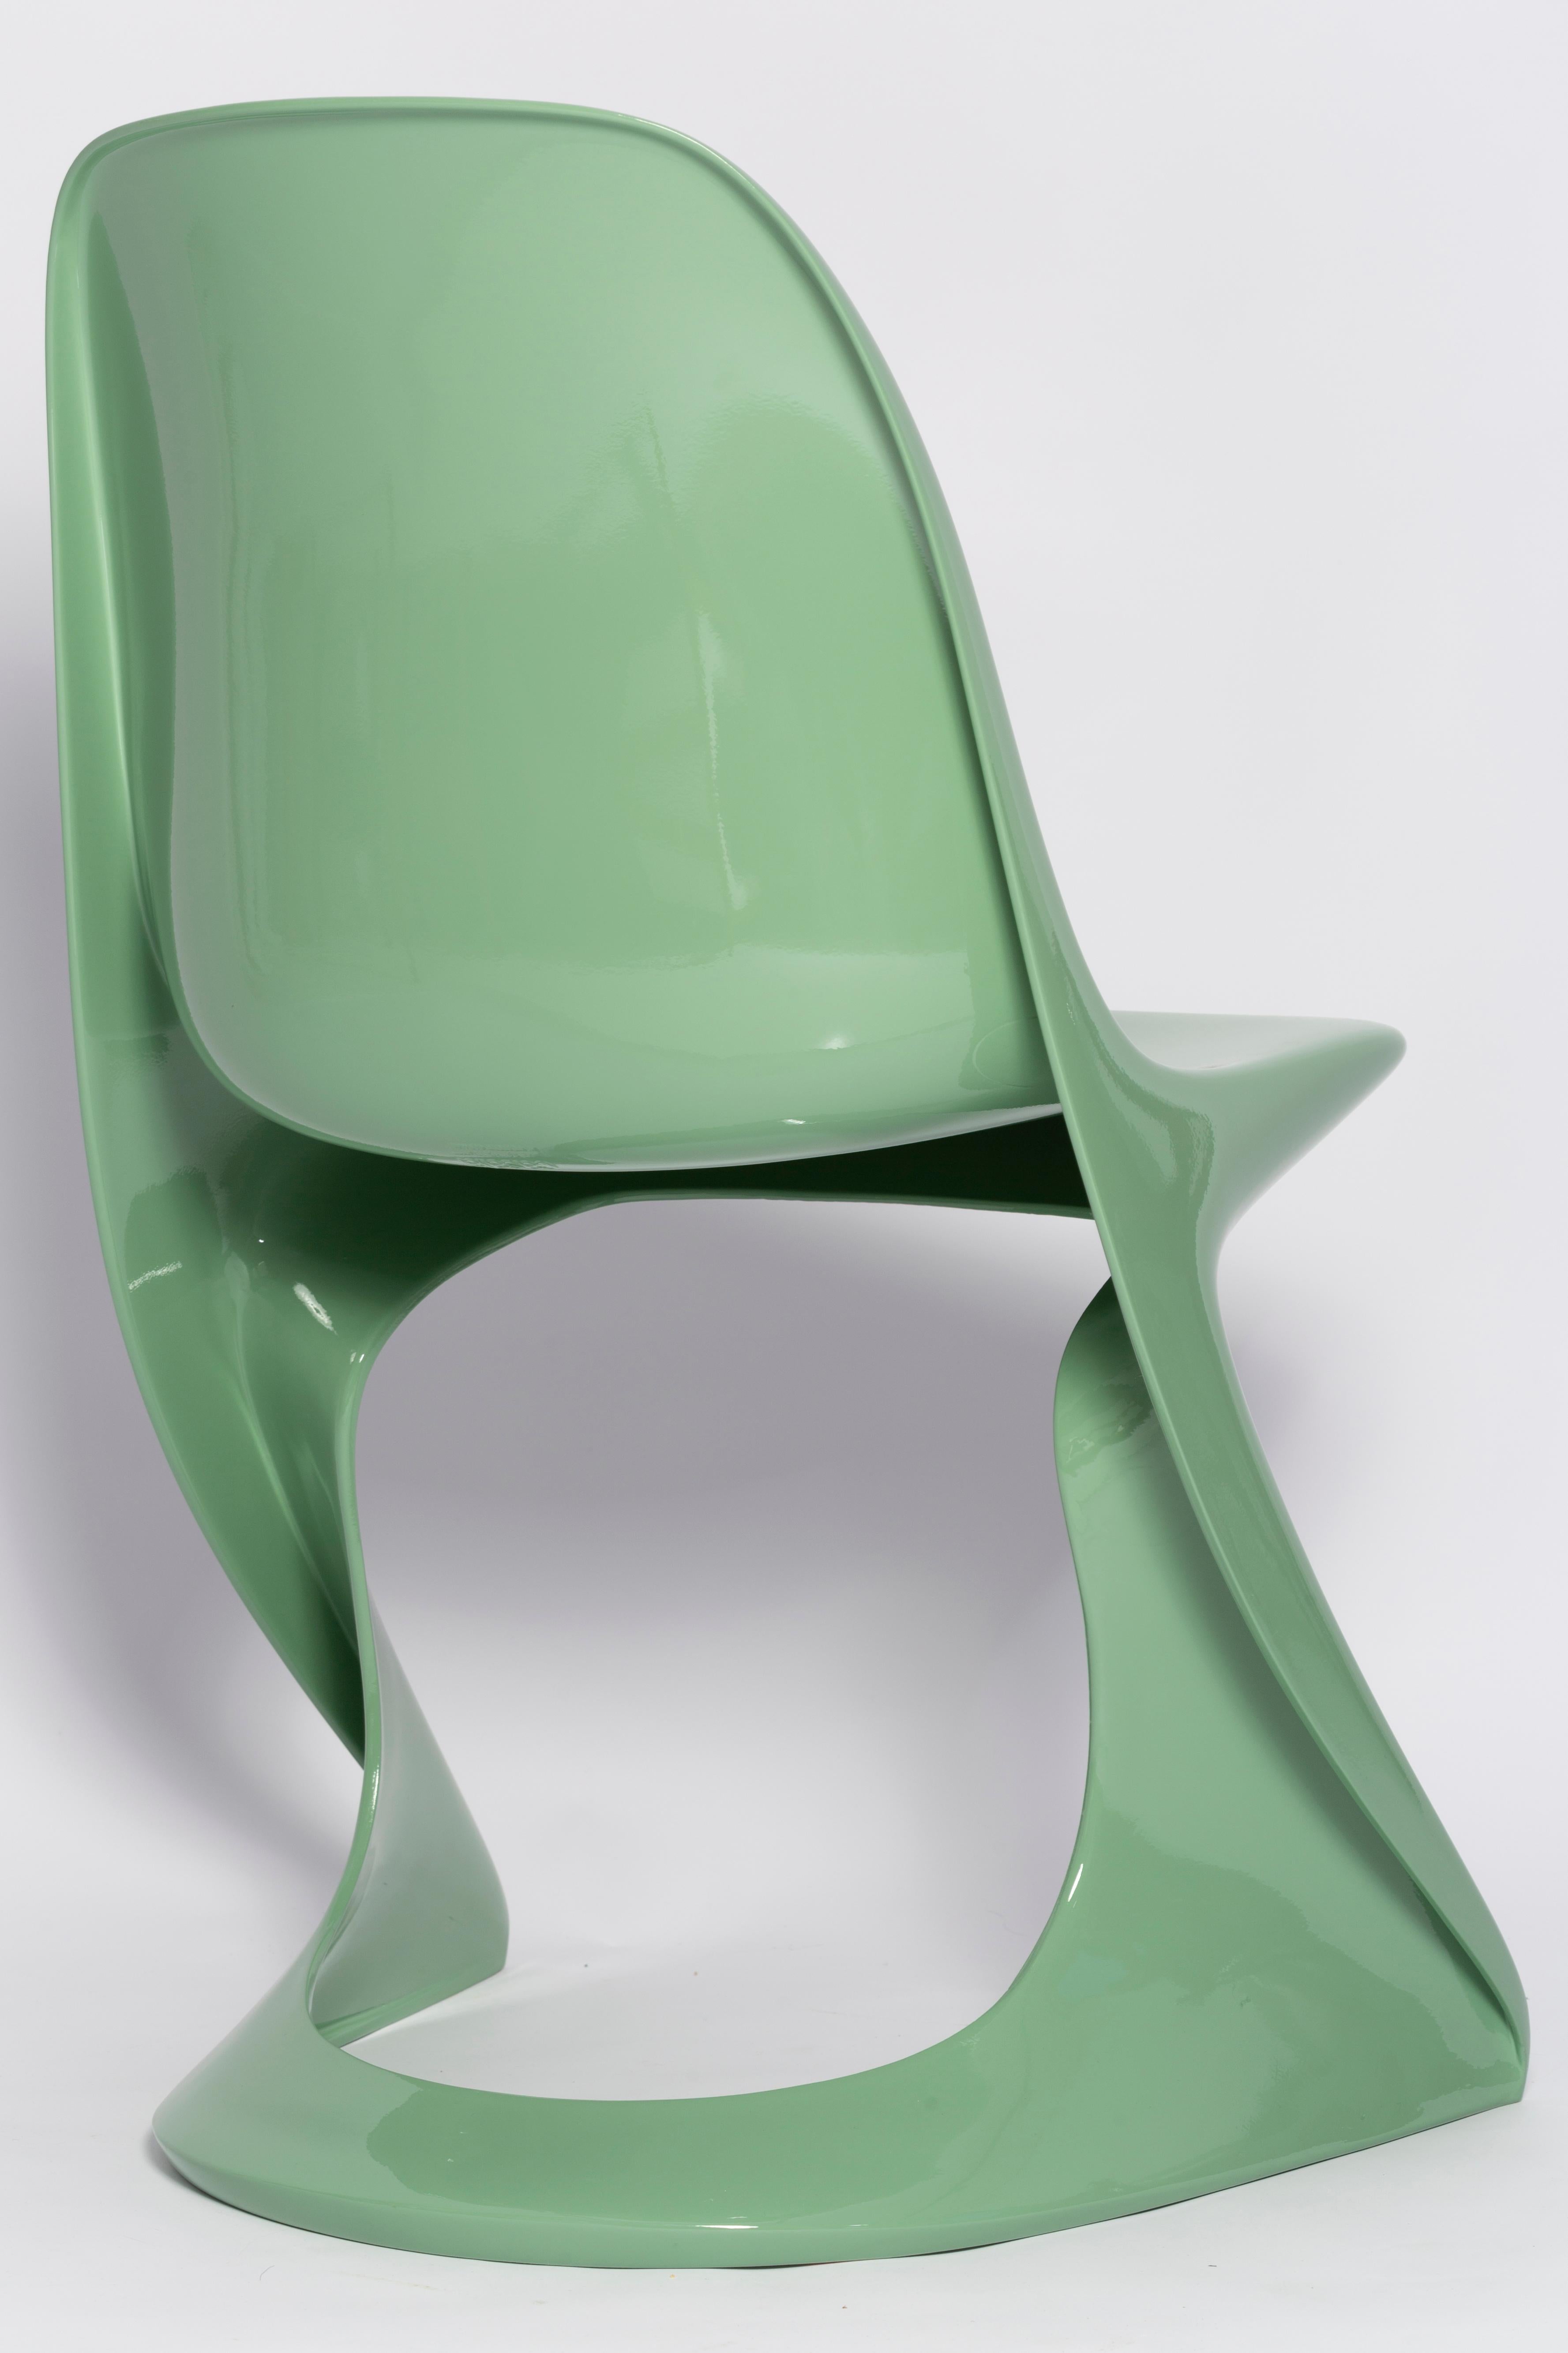 Four Mid-Century Casalino Chairs in Jade Green, Alexander Begge, Casala, 1970s For Sale 2